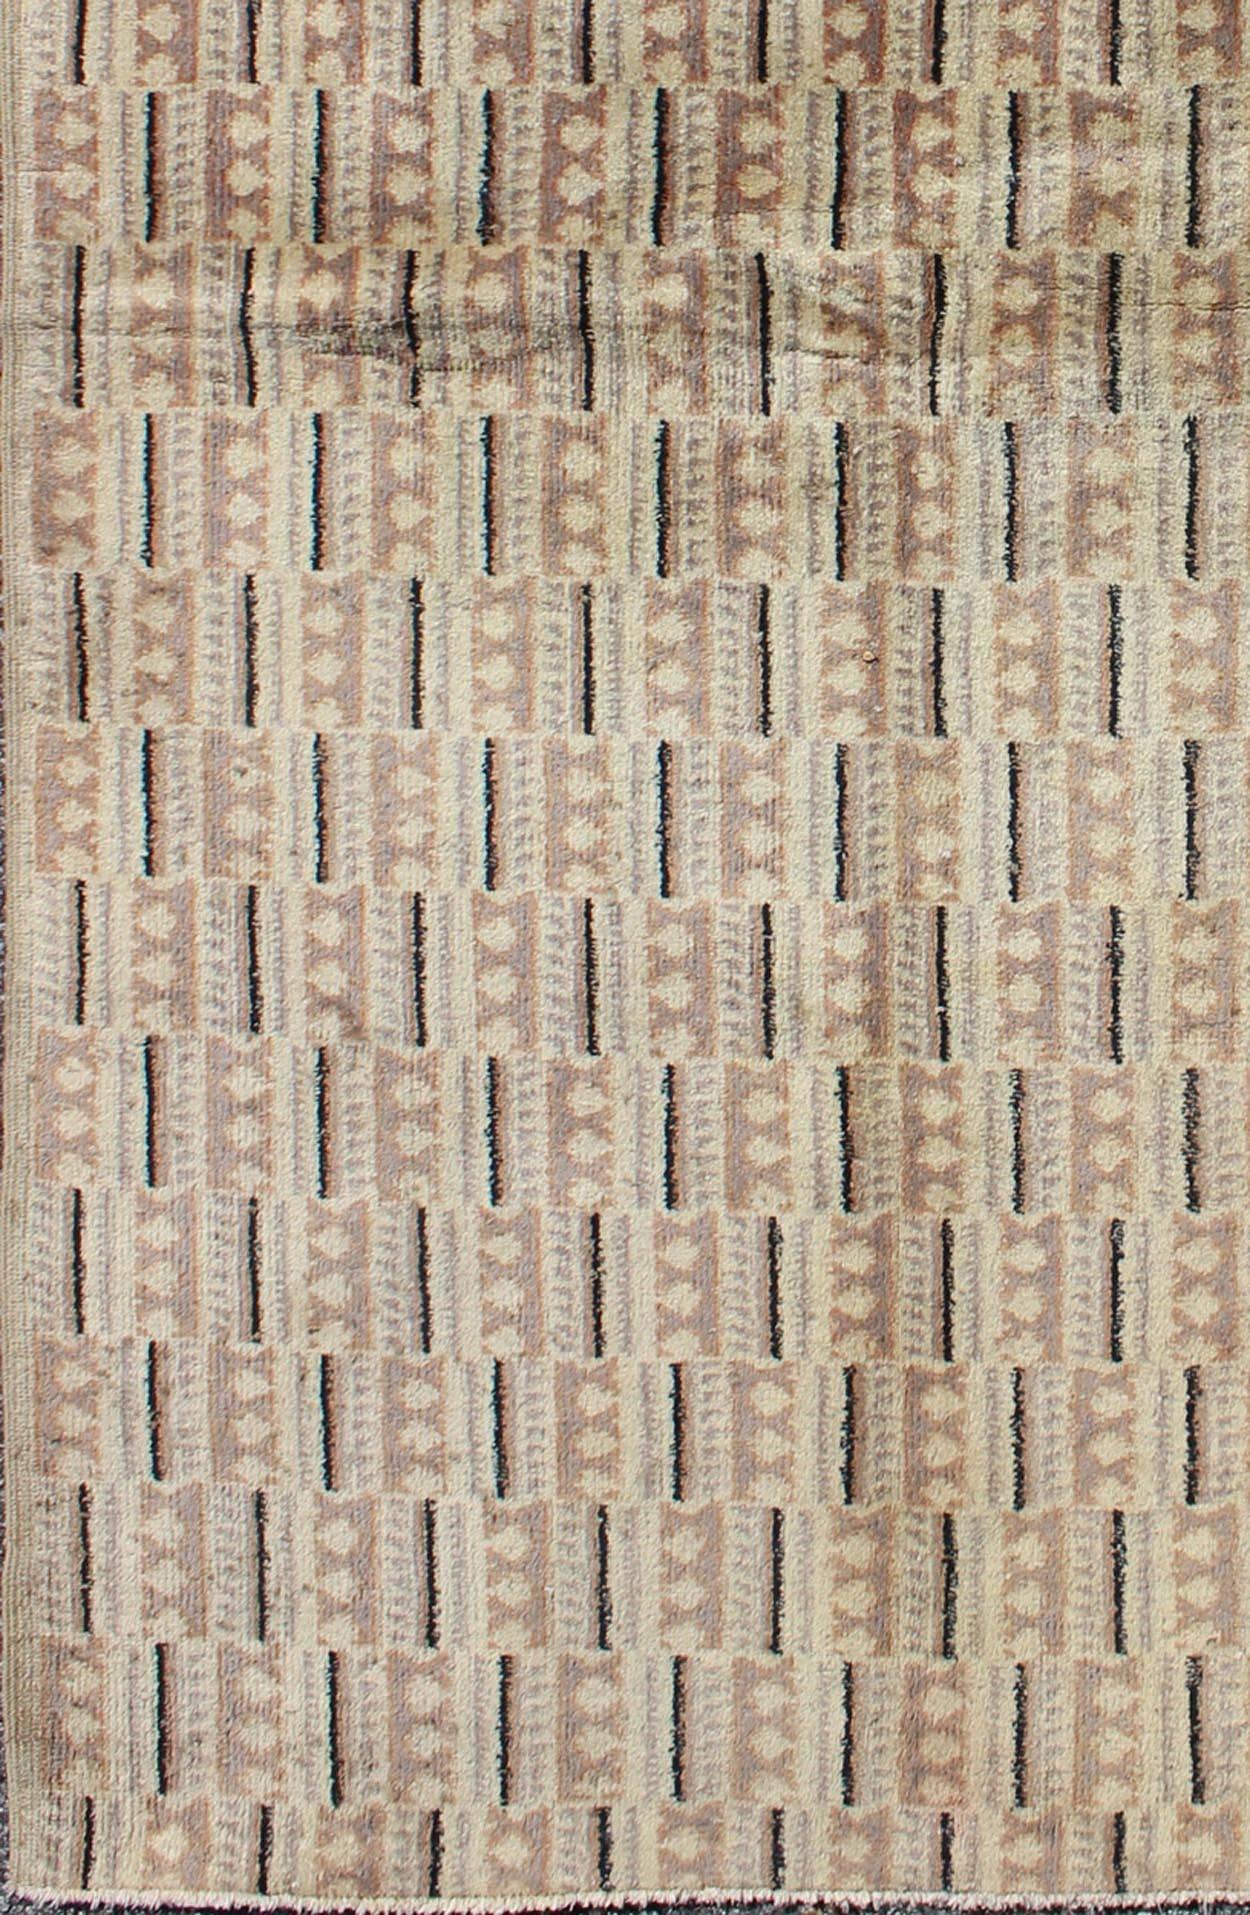 Vintage Zeki Müren Rug with a Modern Design.

Measures: 3'7 x 6'6.

Vintage Mid-Century Zeki Müren Rug in excellent condition.  Rug # EN-960, 
This finely handwoven Zeki Müren vintage rug displays a unique design and color combination. Colors